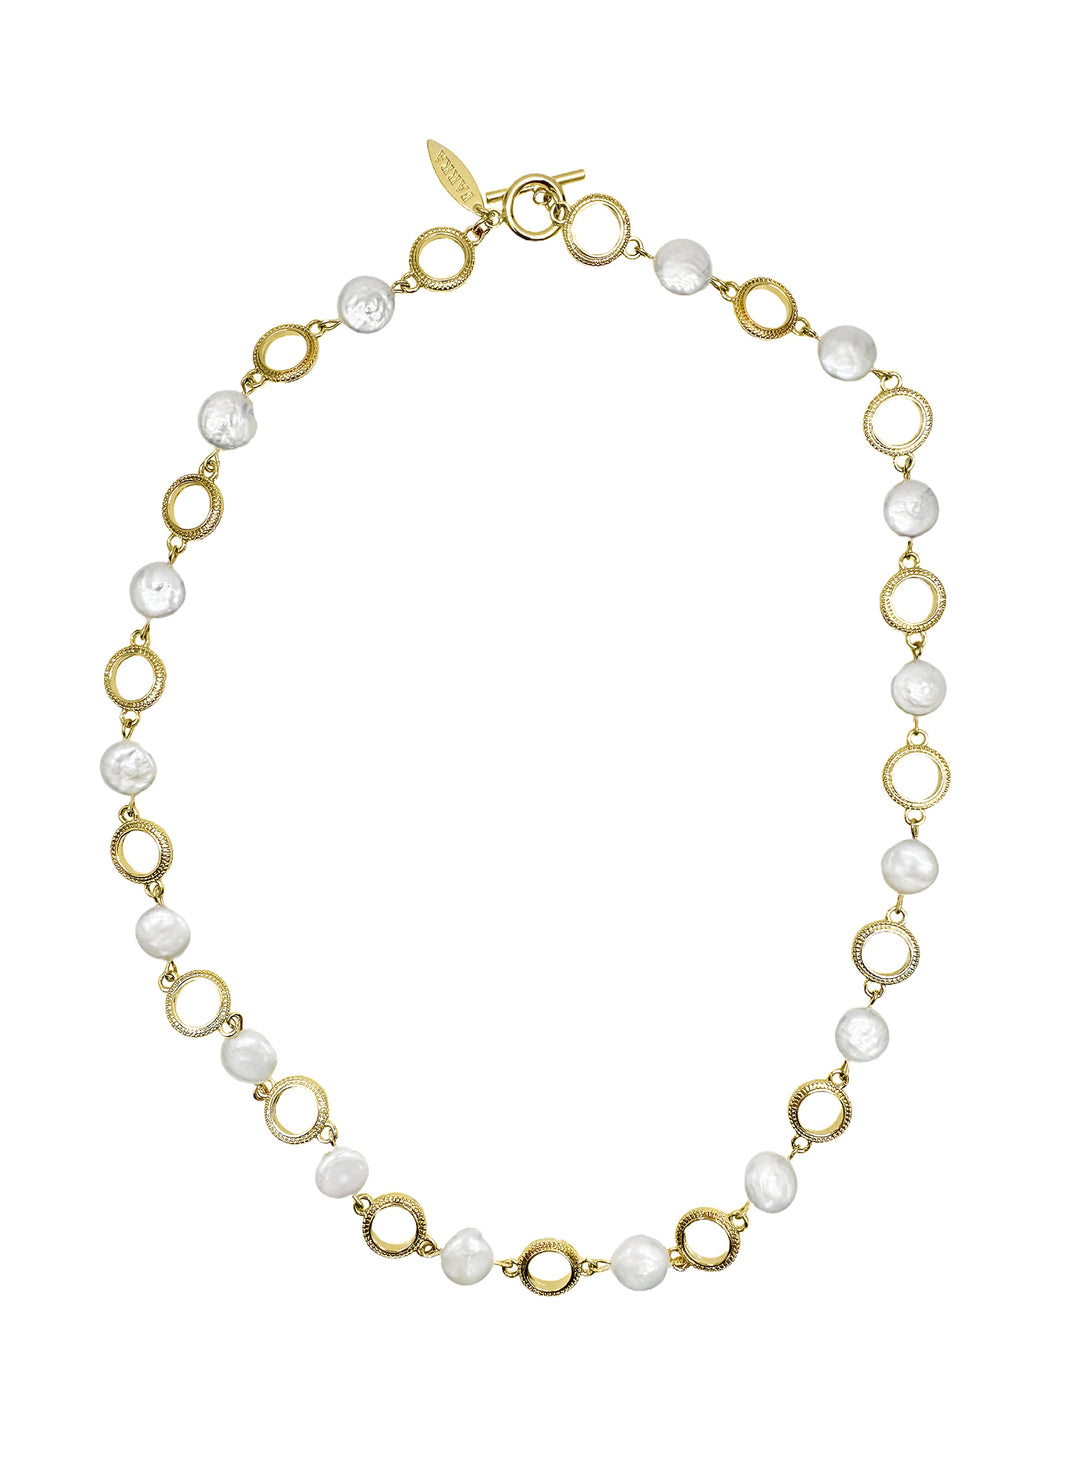 Gold Chain with Coin-Shaped Freshwater Pearls Necklace LN057 - FARRA